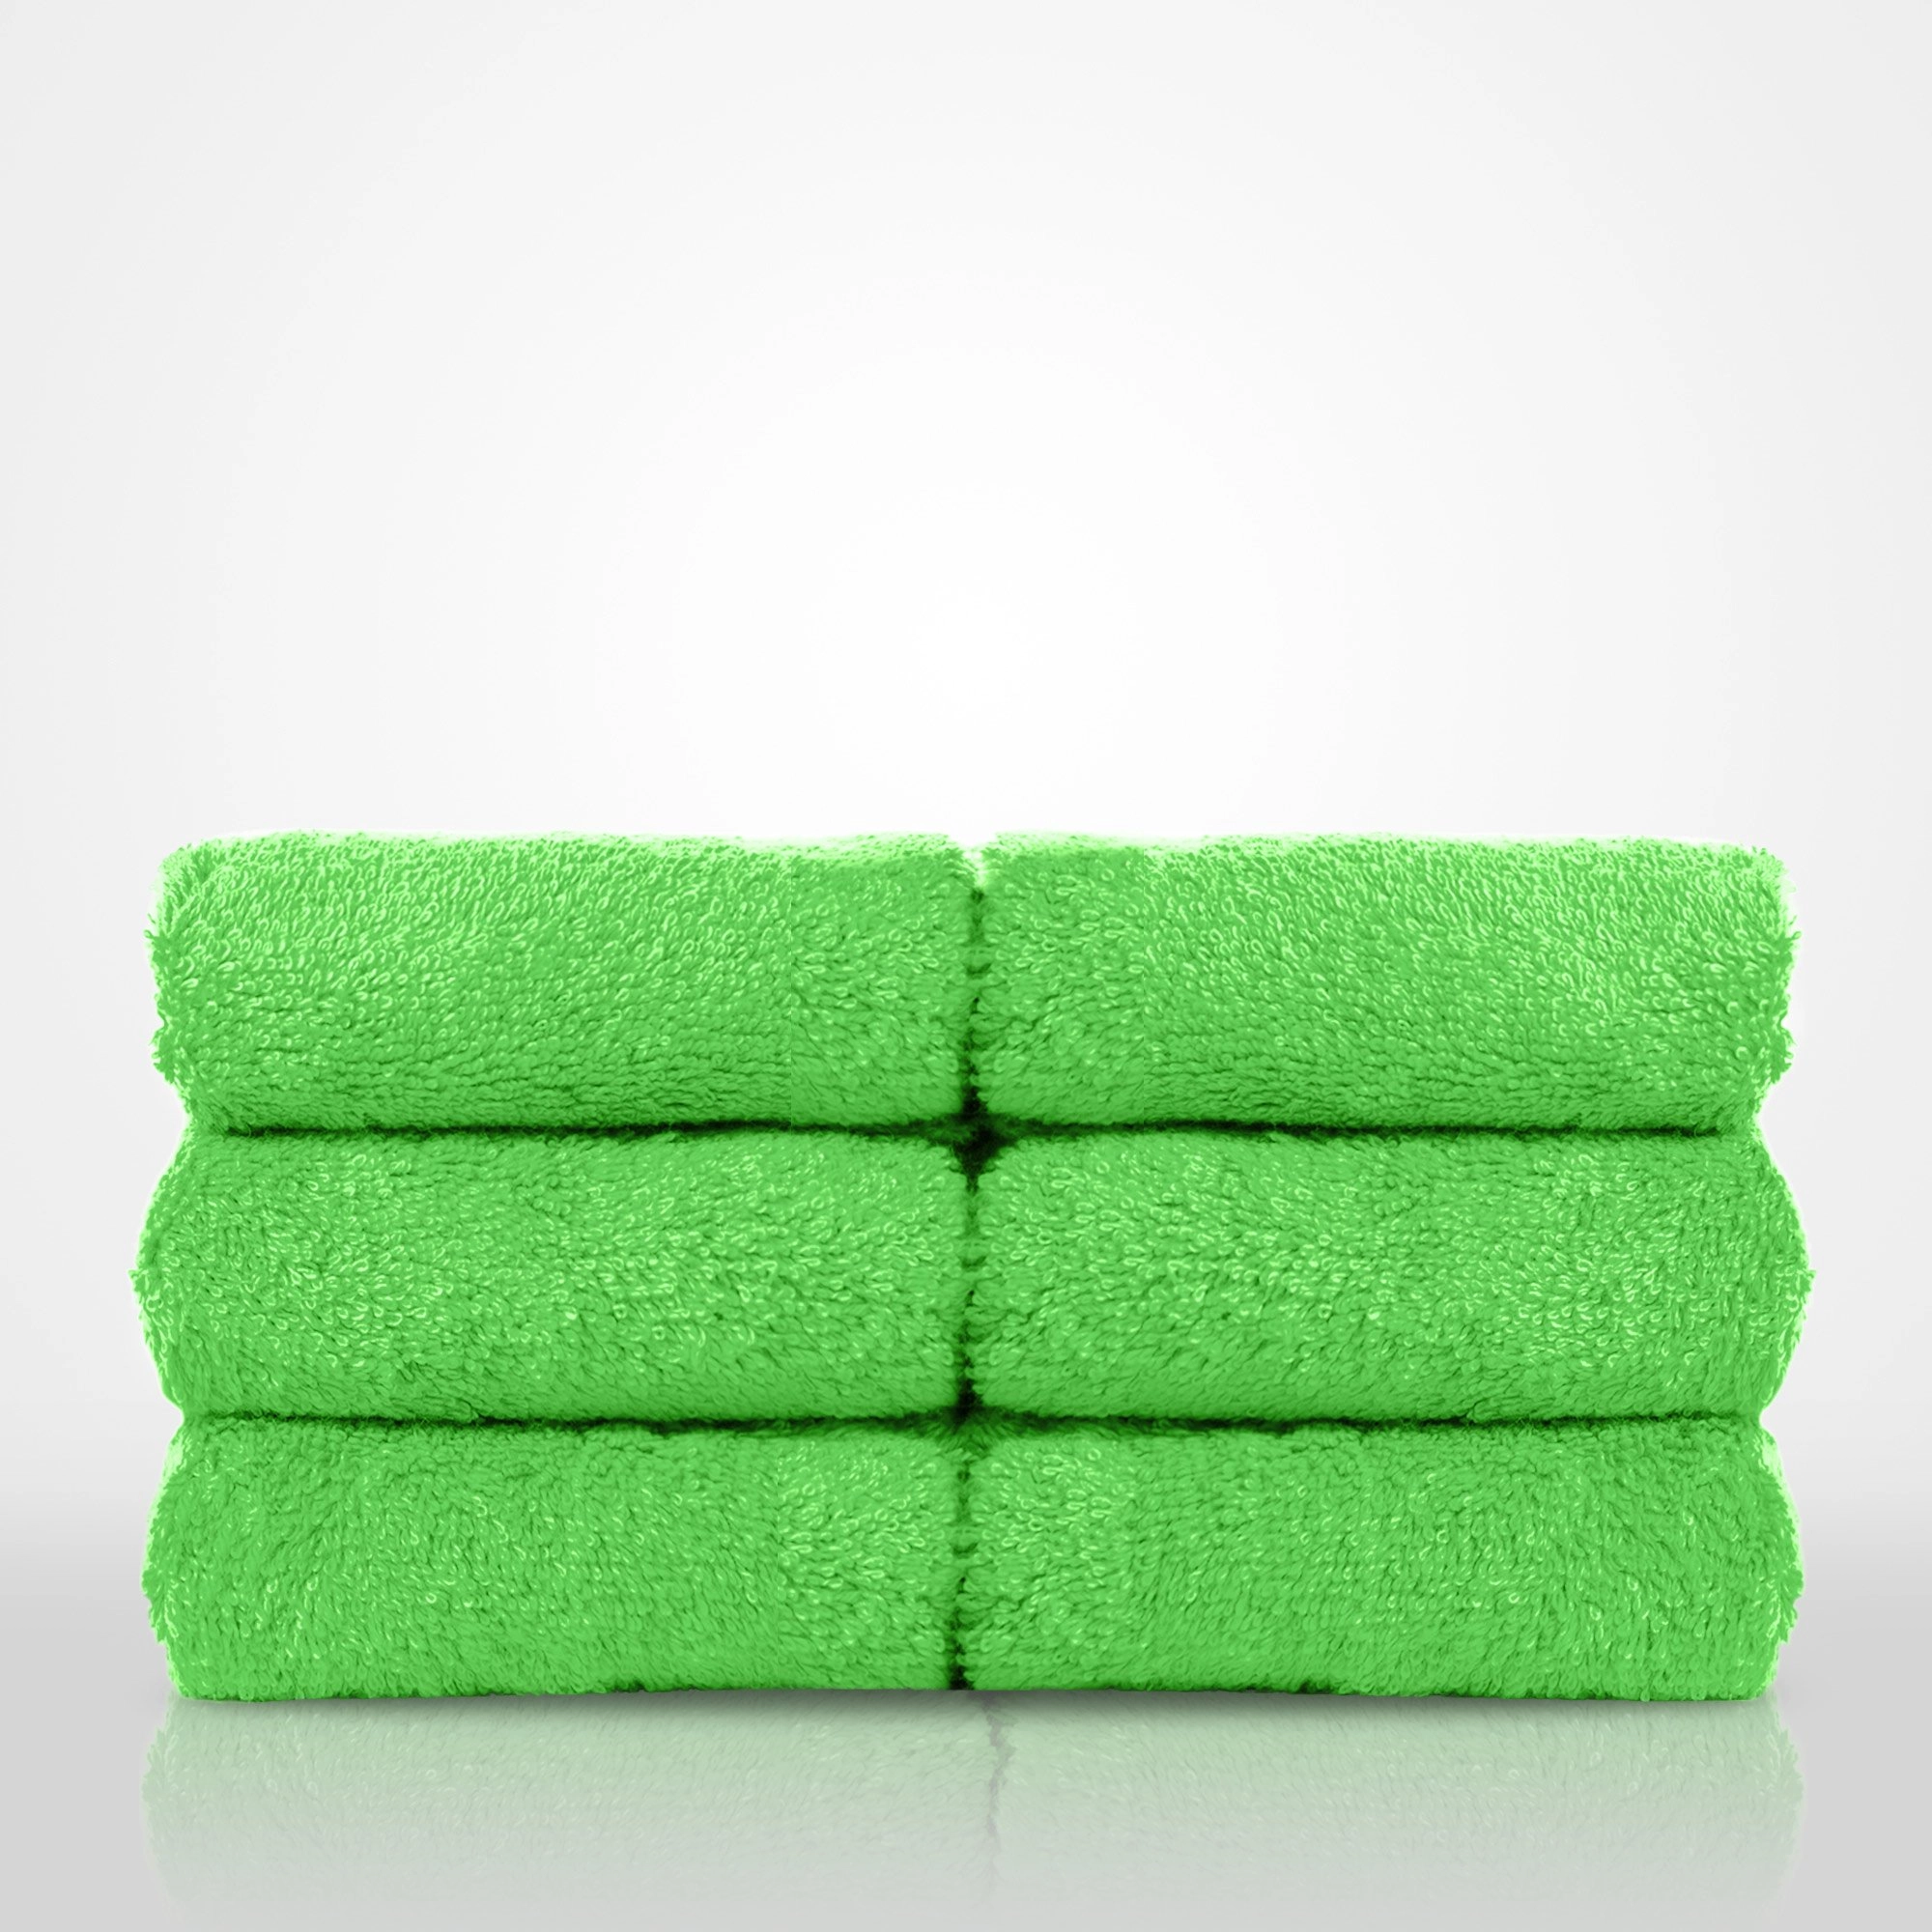 http://robemart.com/images/thumbnails/detailed/4/Turkish-Cotton-Terry-Washcloth-Lime-Green.webp